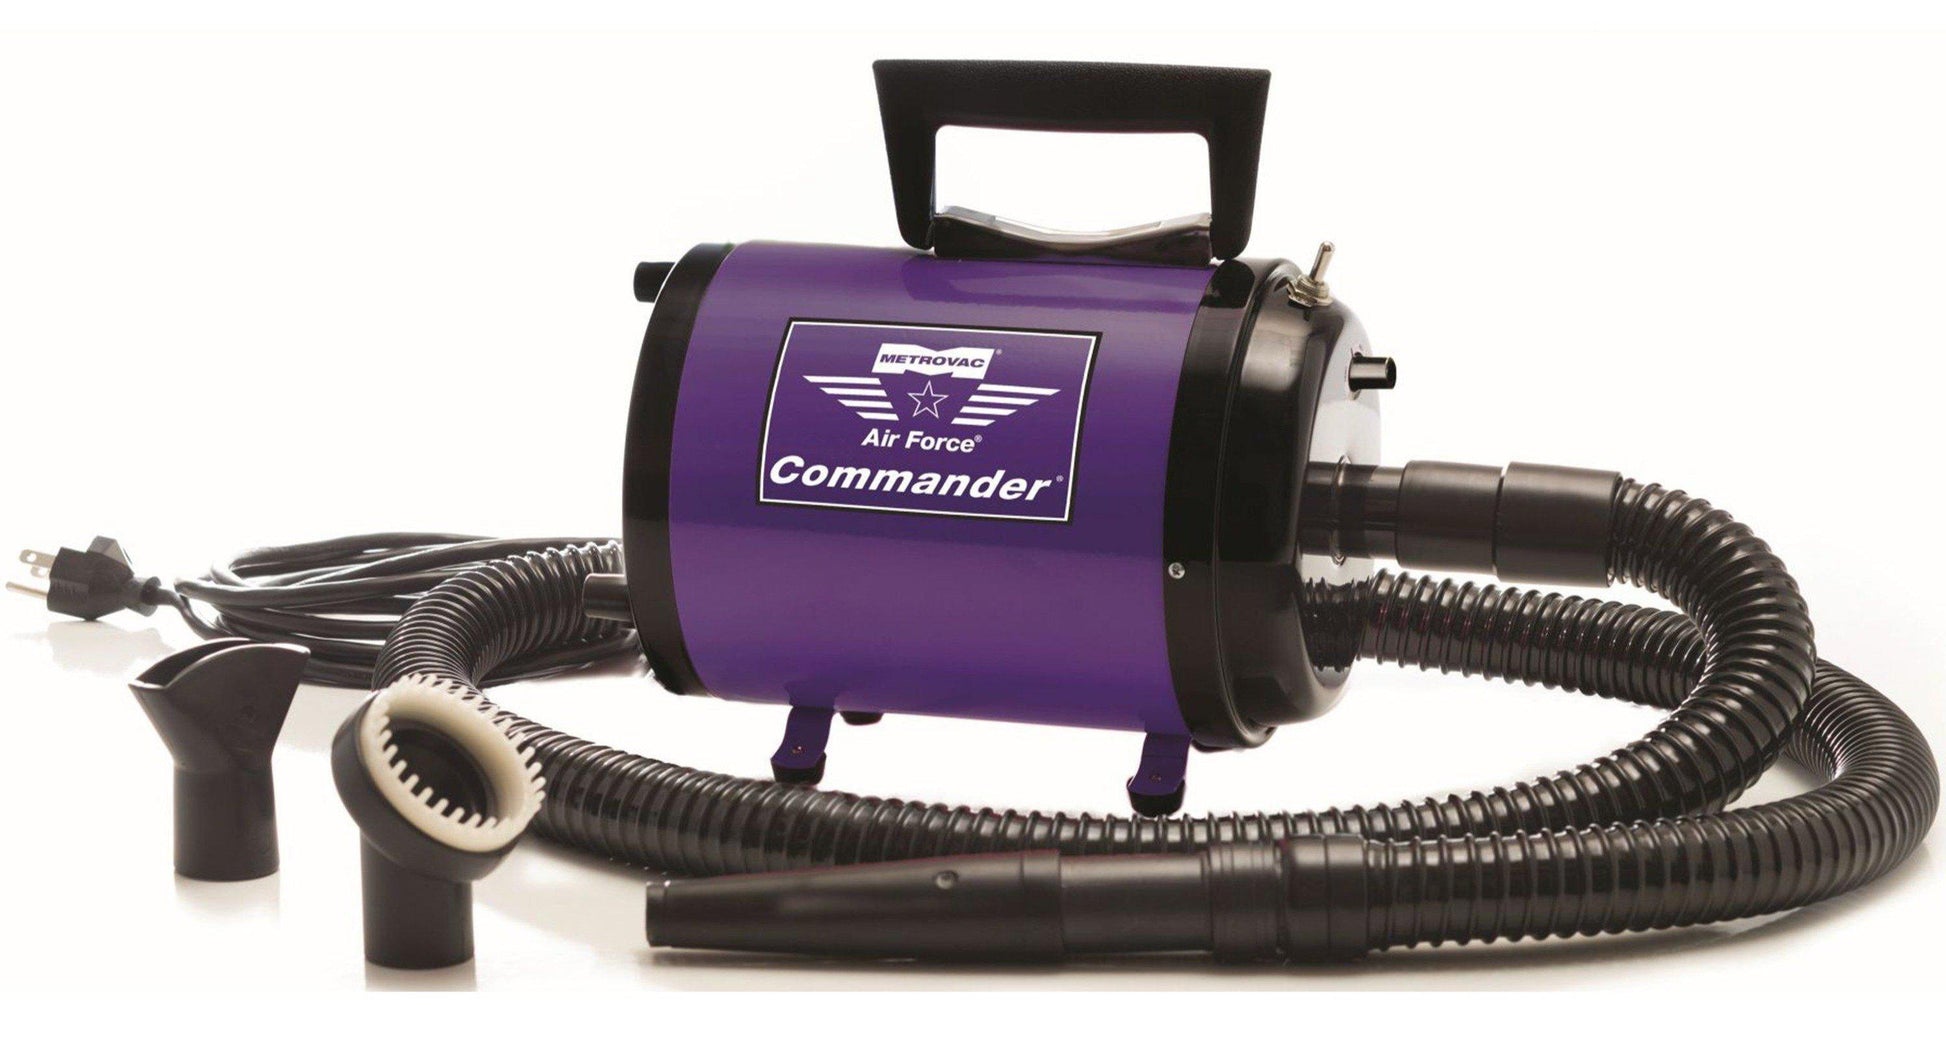 Metrovac Air Force Commander Multi-Speed Dog & Pet Dryer-Dryers-Pet's Choice Supply